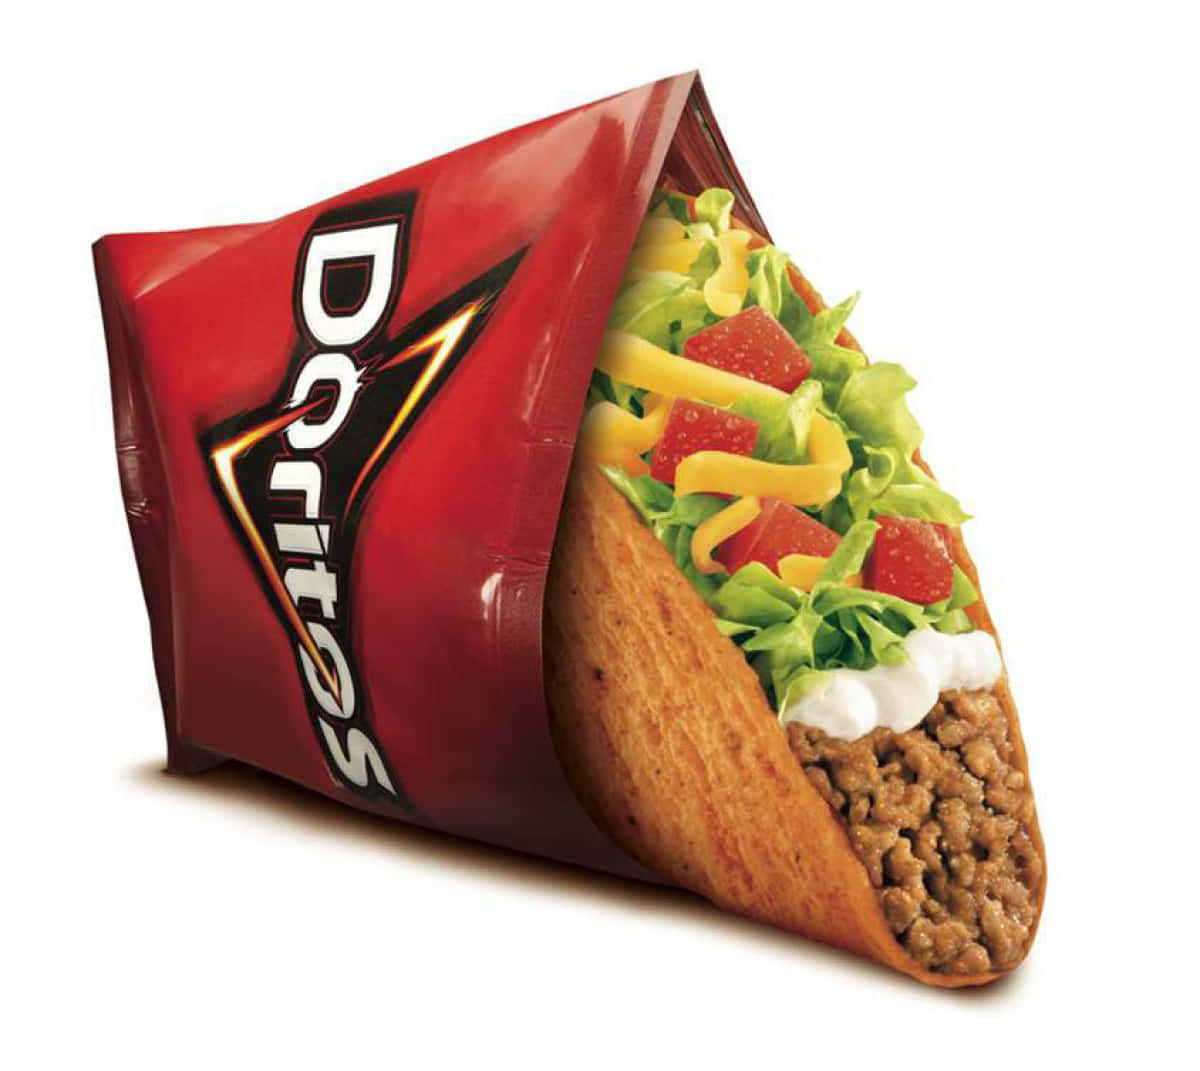 Treat yourself to an irresistible snack that definitely hits the spot – Taco Bell